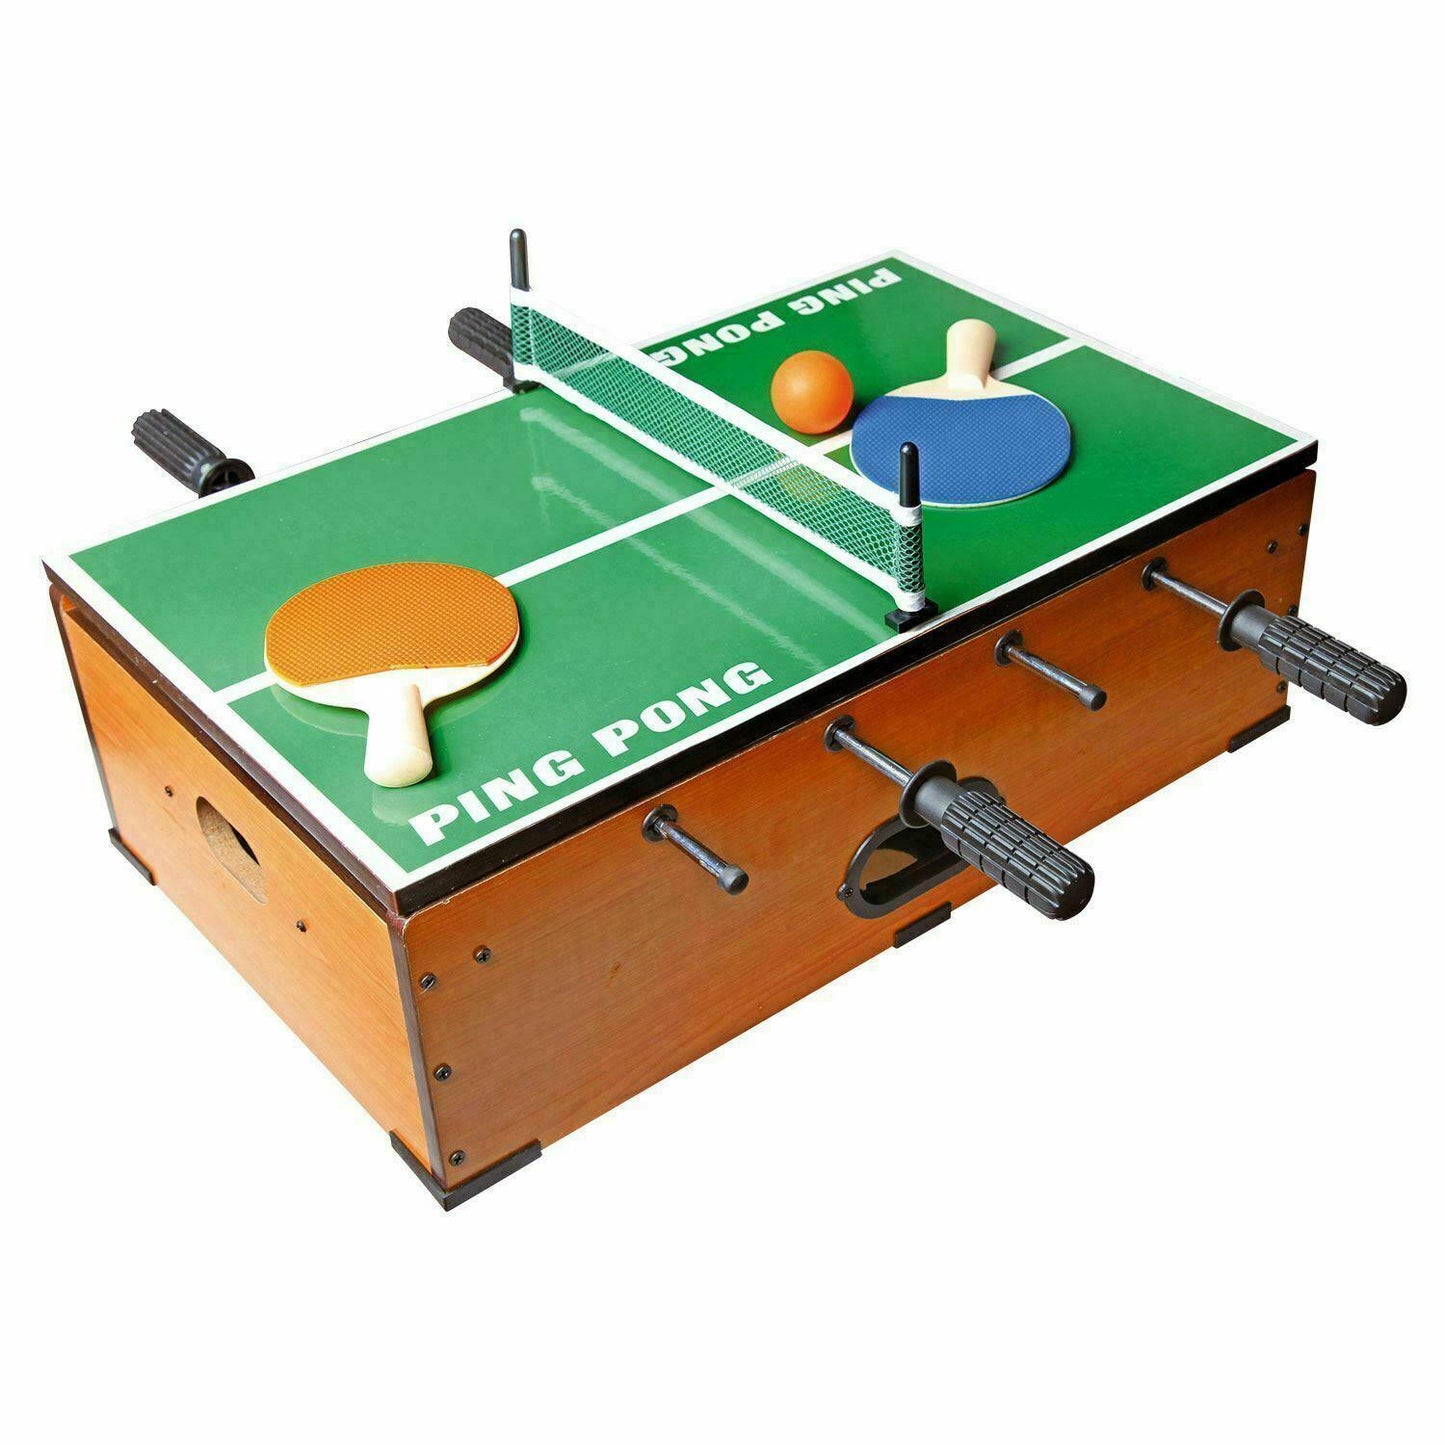 5-IN-1 INDOOR GAMES TABLETOP SET BAR FOOTBALL POOL PING PONG BACKGAMMON CHESS